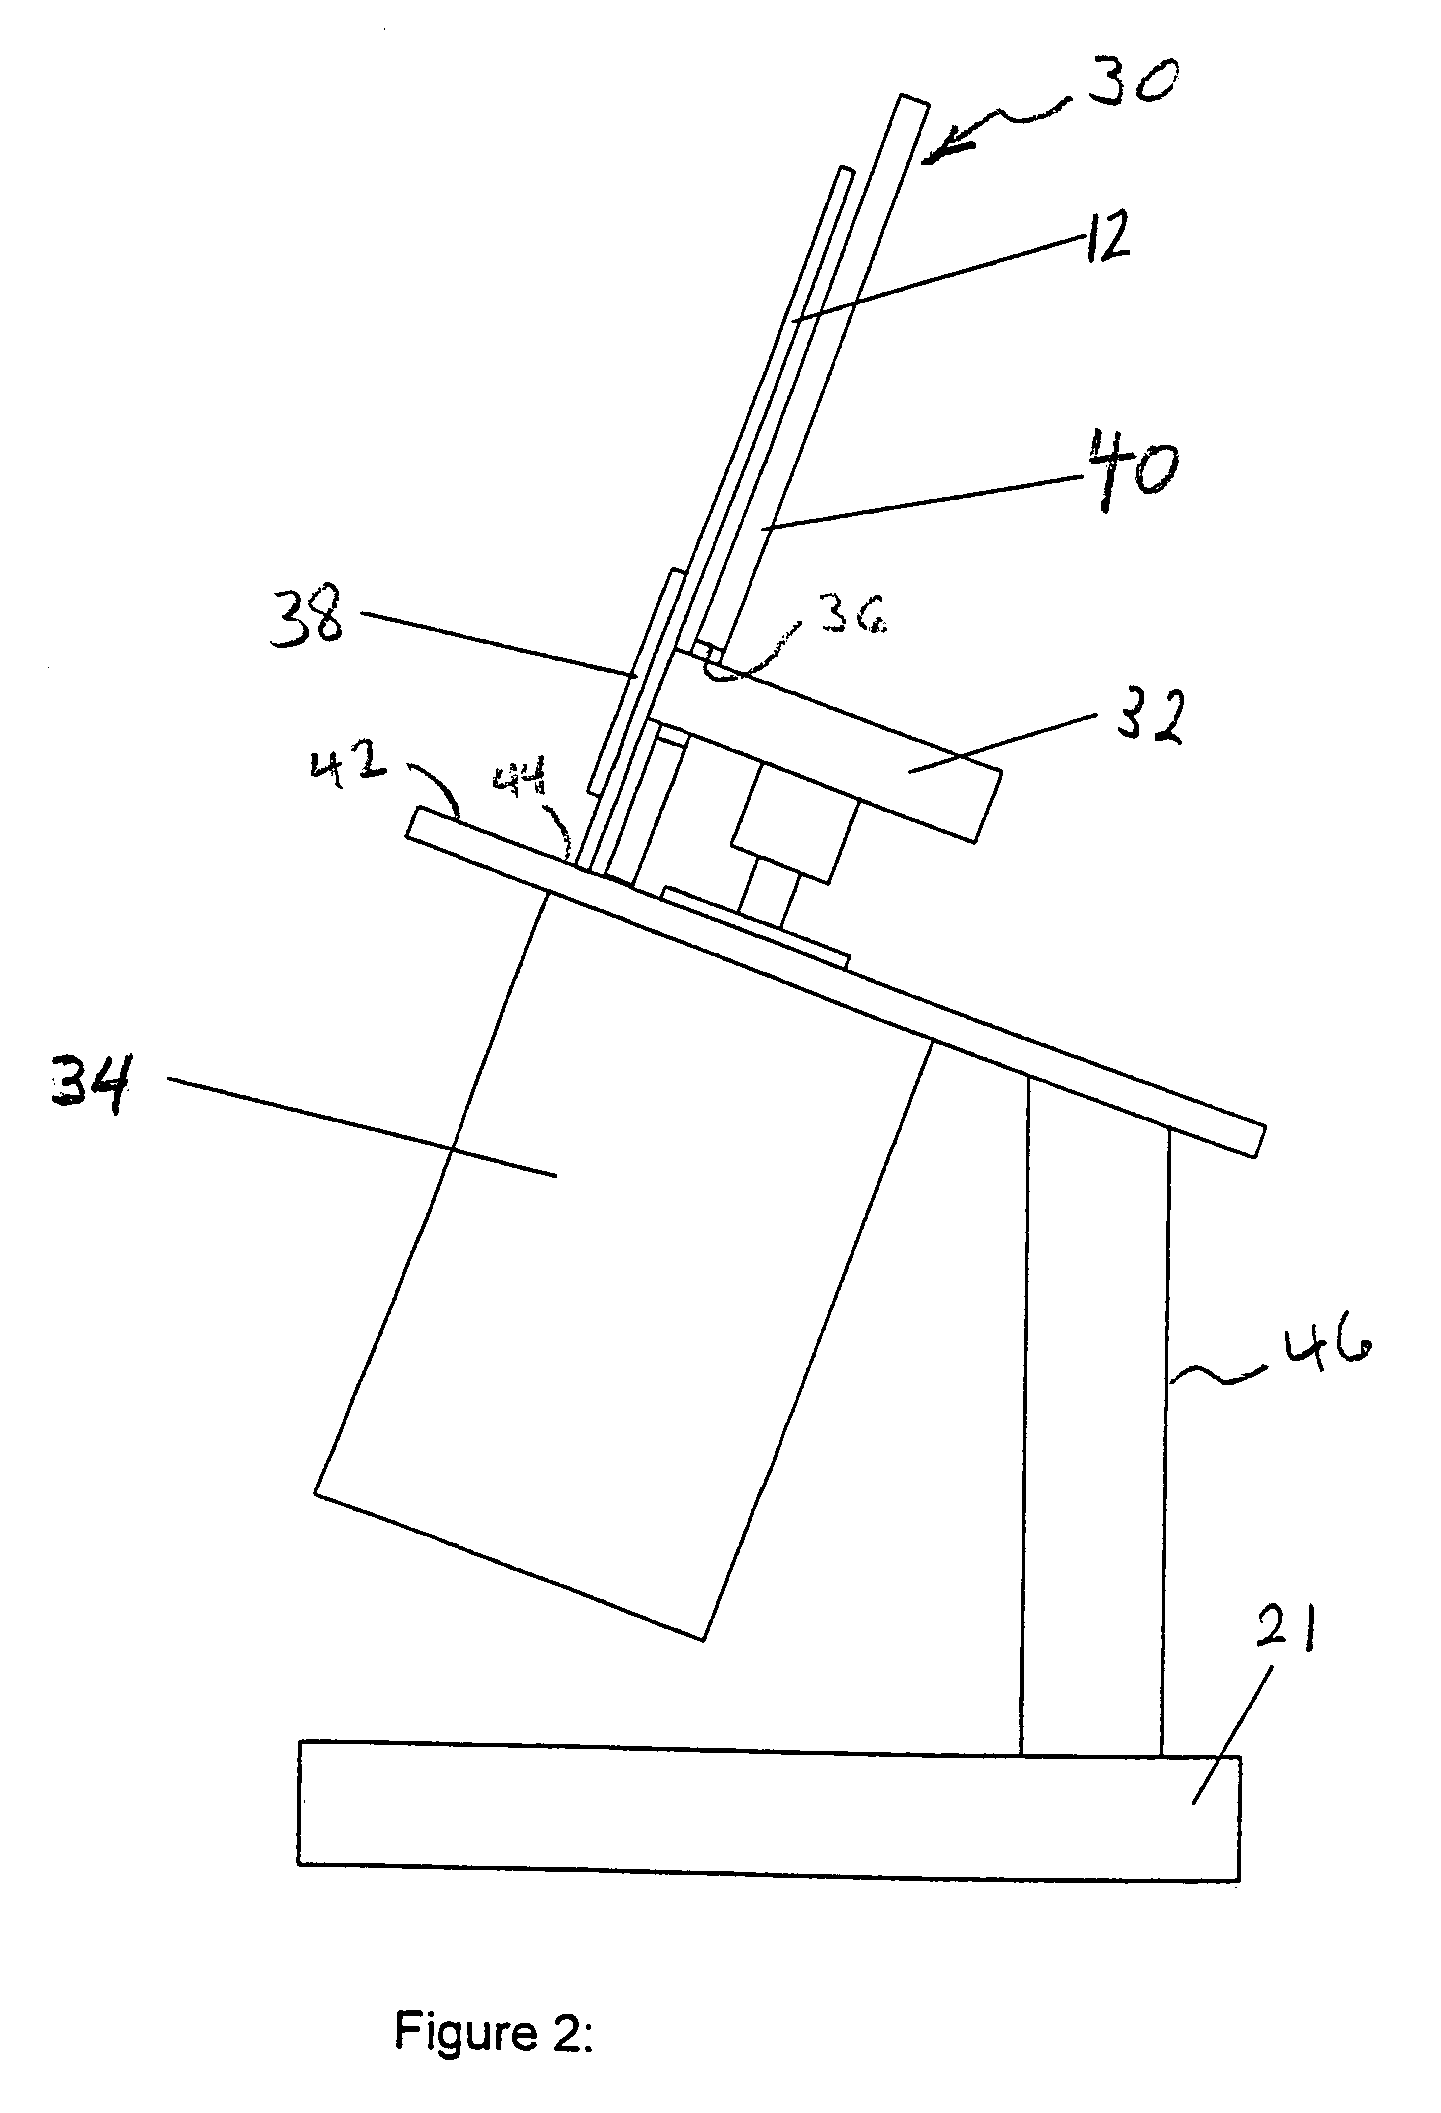 System for high-speed automatic weighing of items in a mail stream